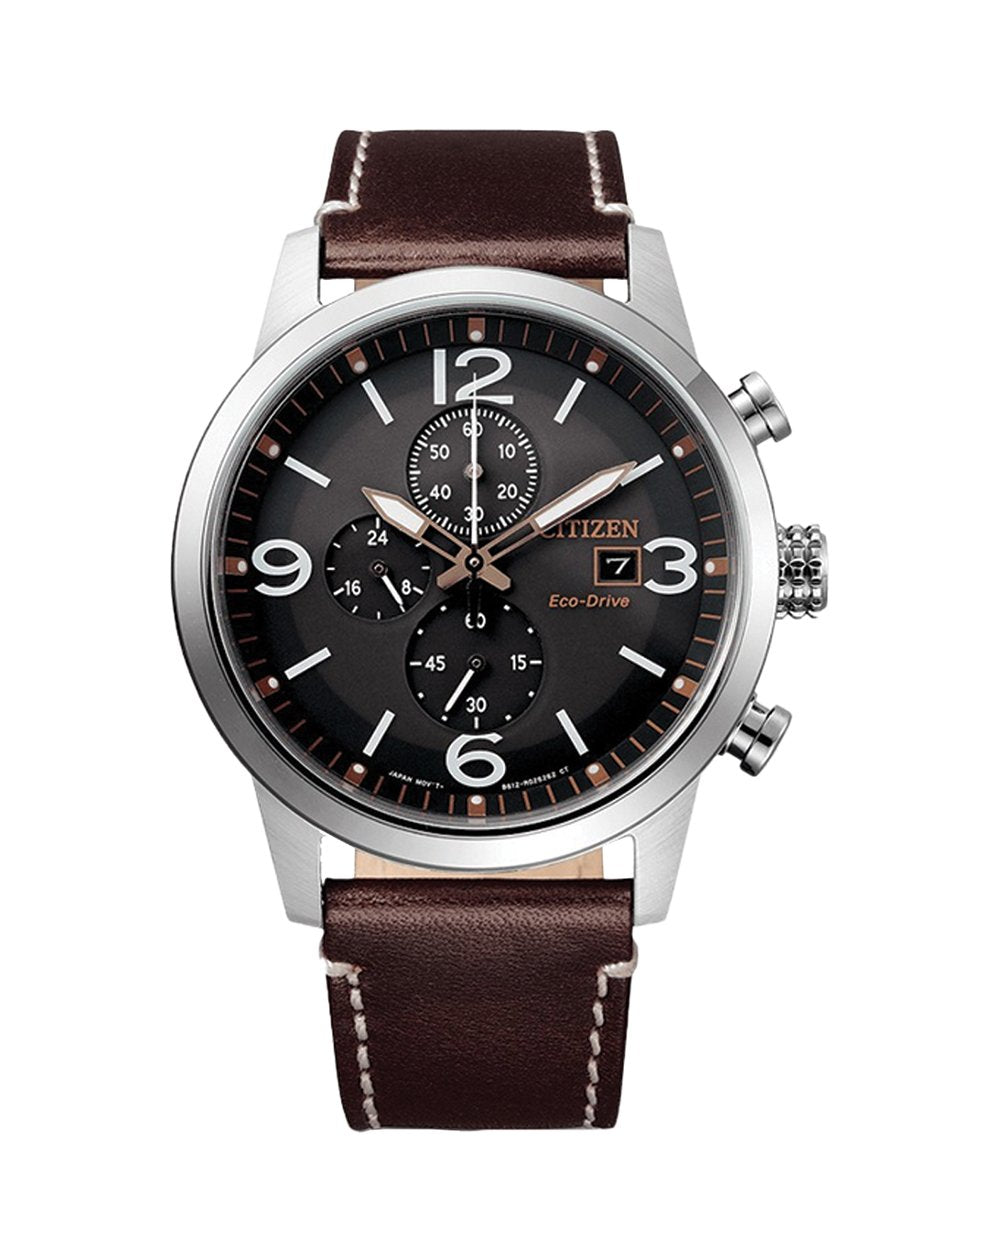 Citizen men's Eco-Drive chronograph watch with leather strap